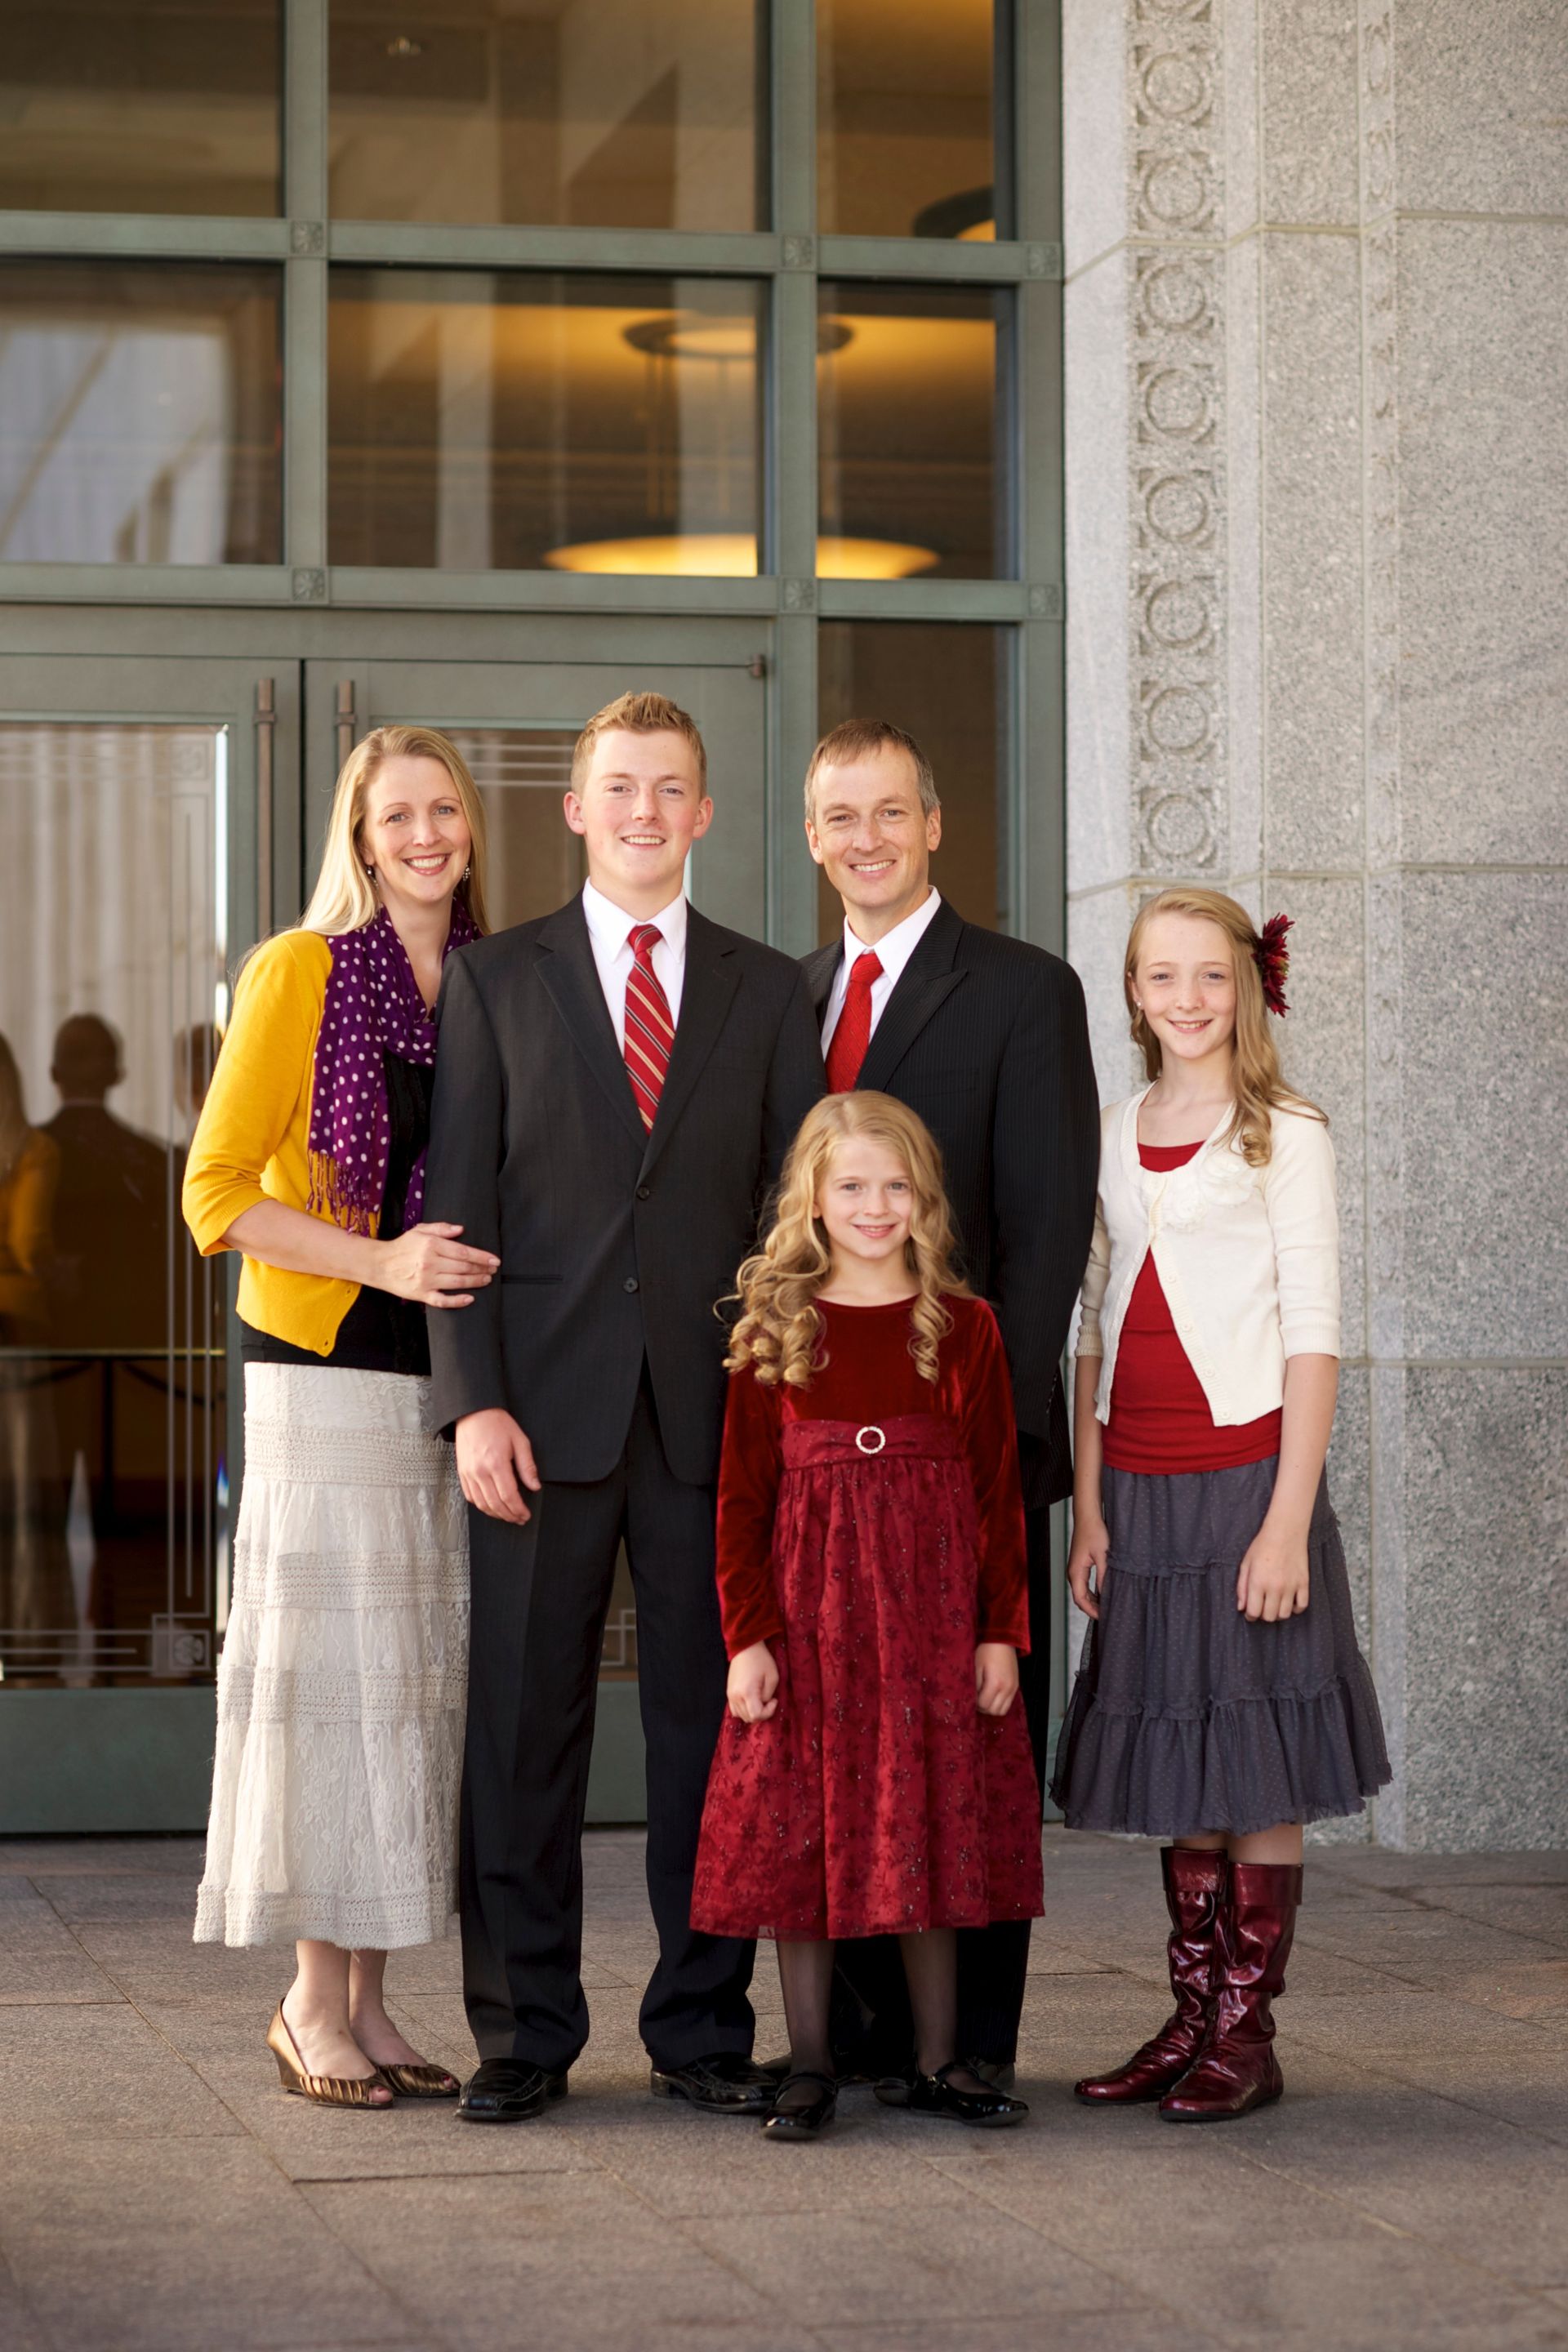 Two parents and their three children stand outside the doors of the Conference Center.  